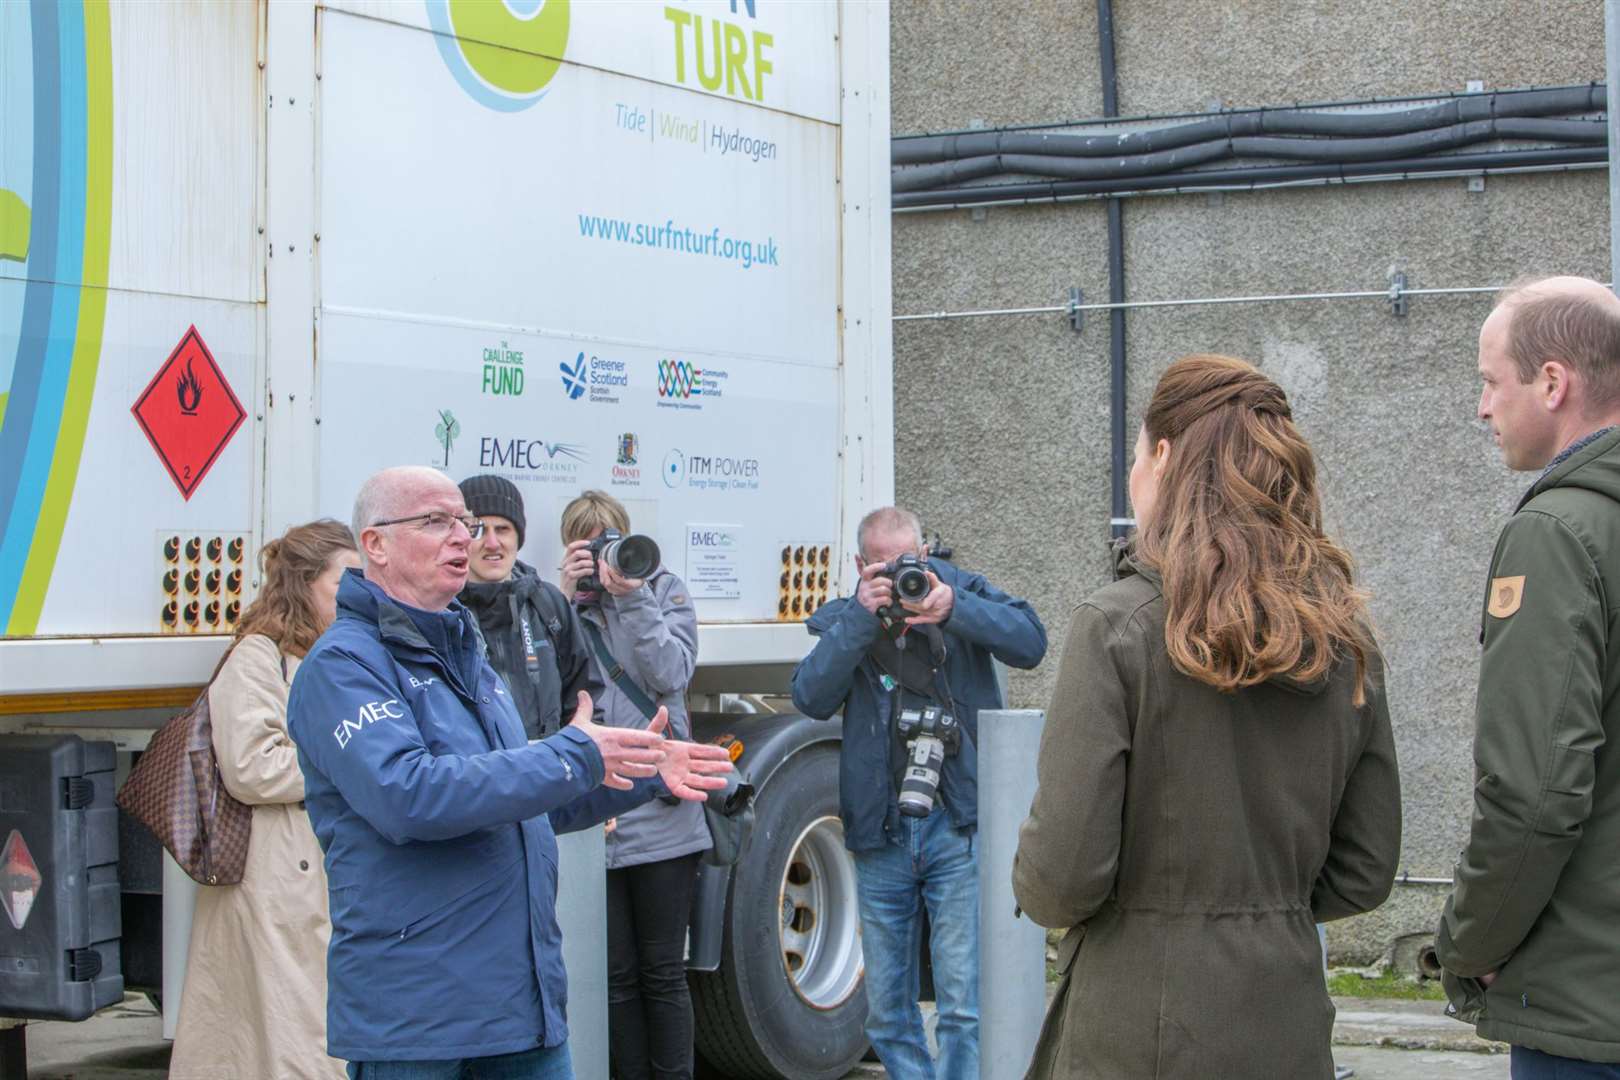 Neil Kermode provides an overview of EMEC's greem hydrogen projects to special visitors the Duke and Duchess of Cambridge. Picture: Colin Keddie.